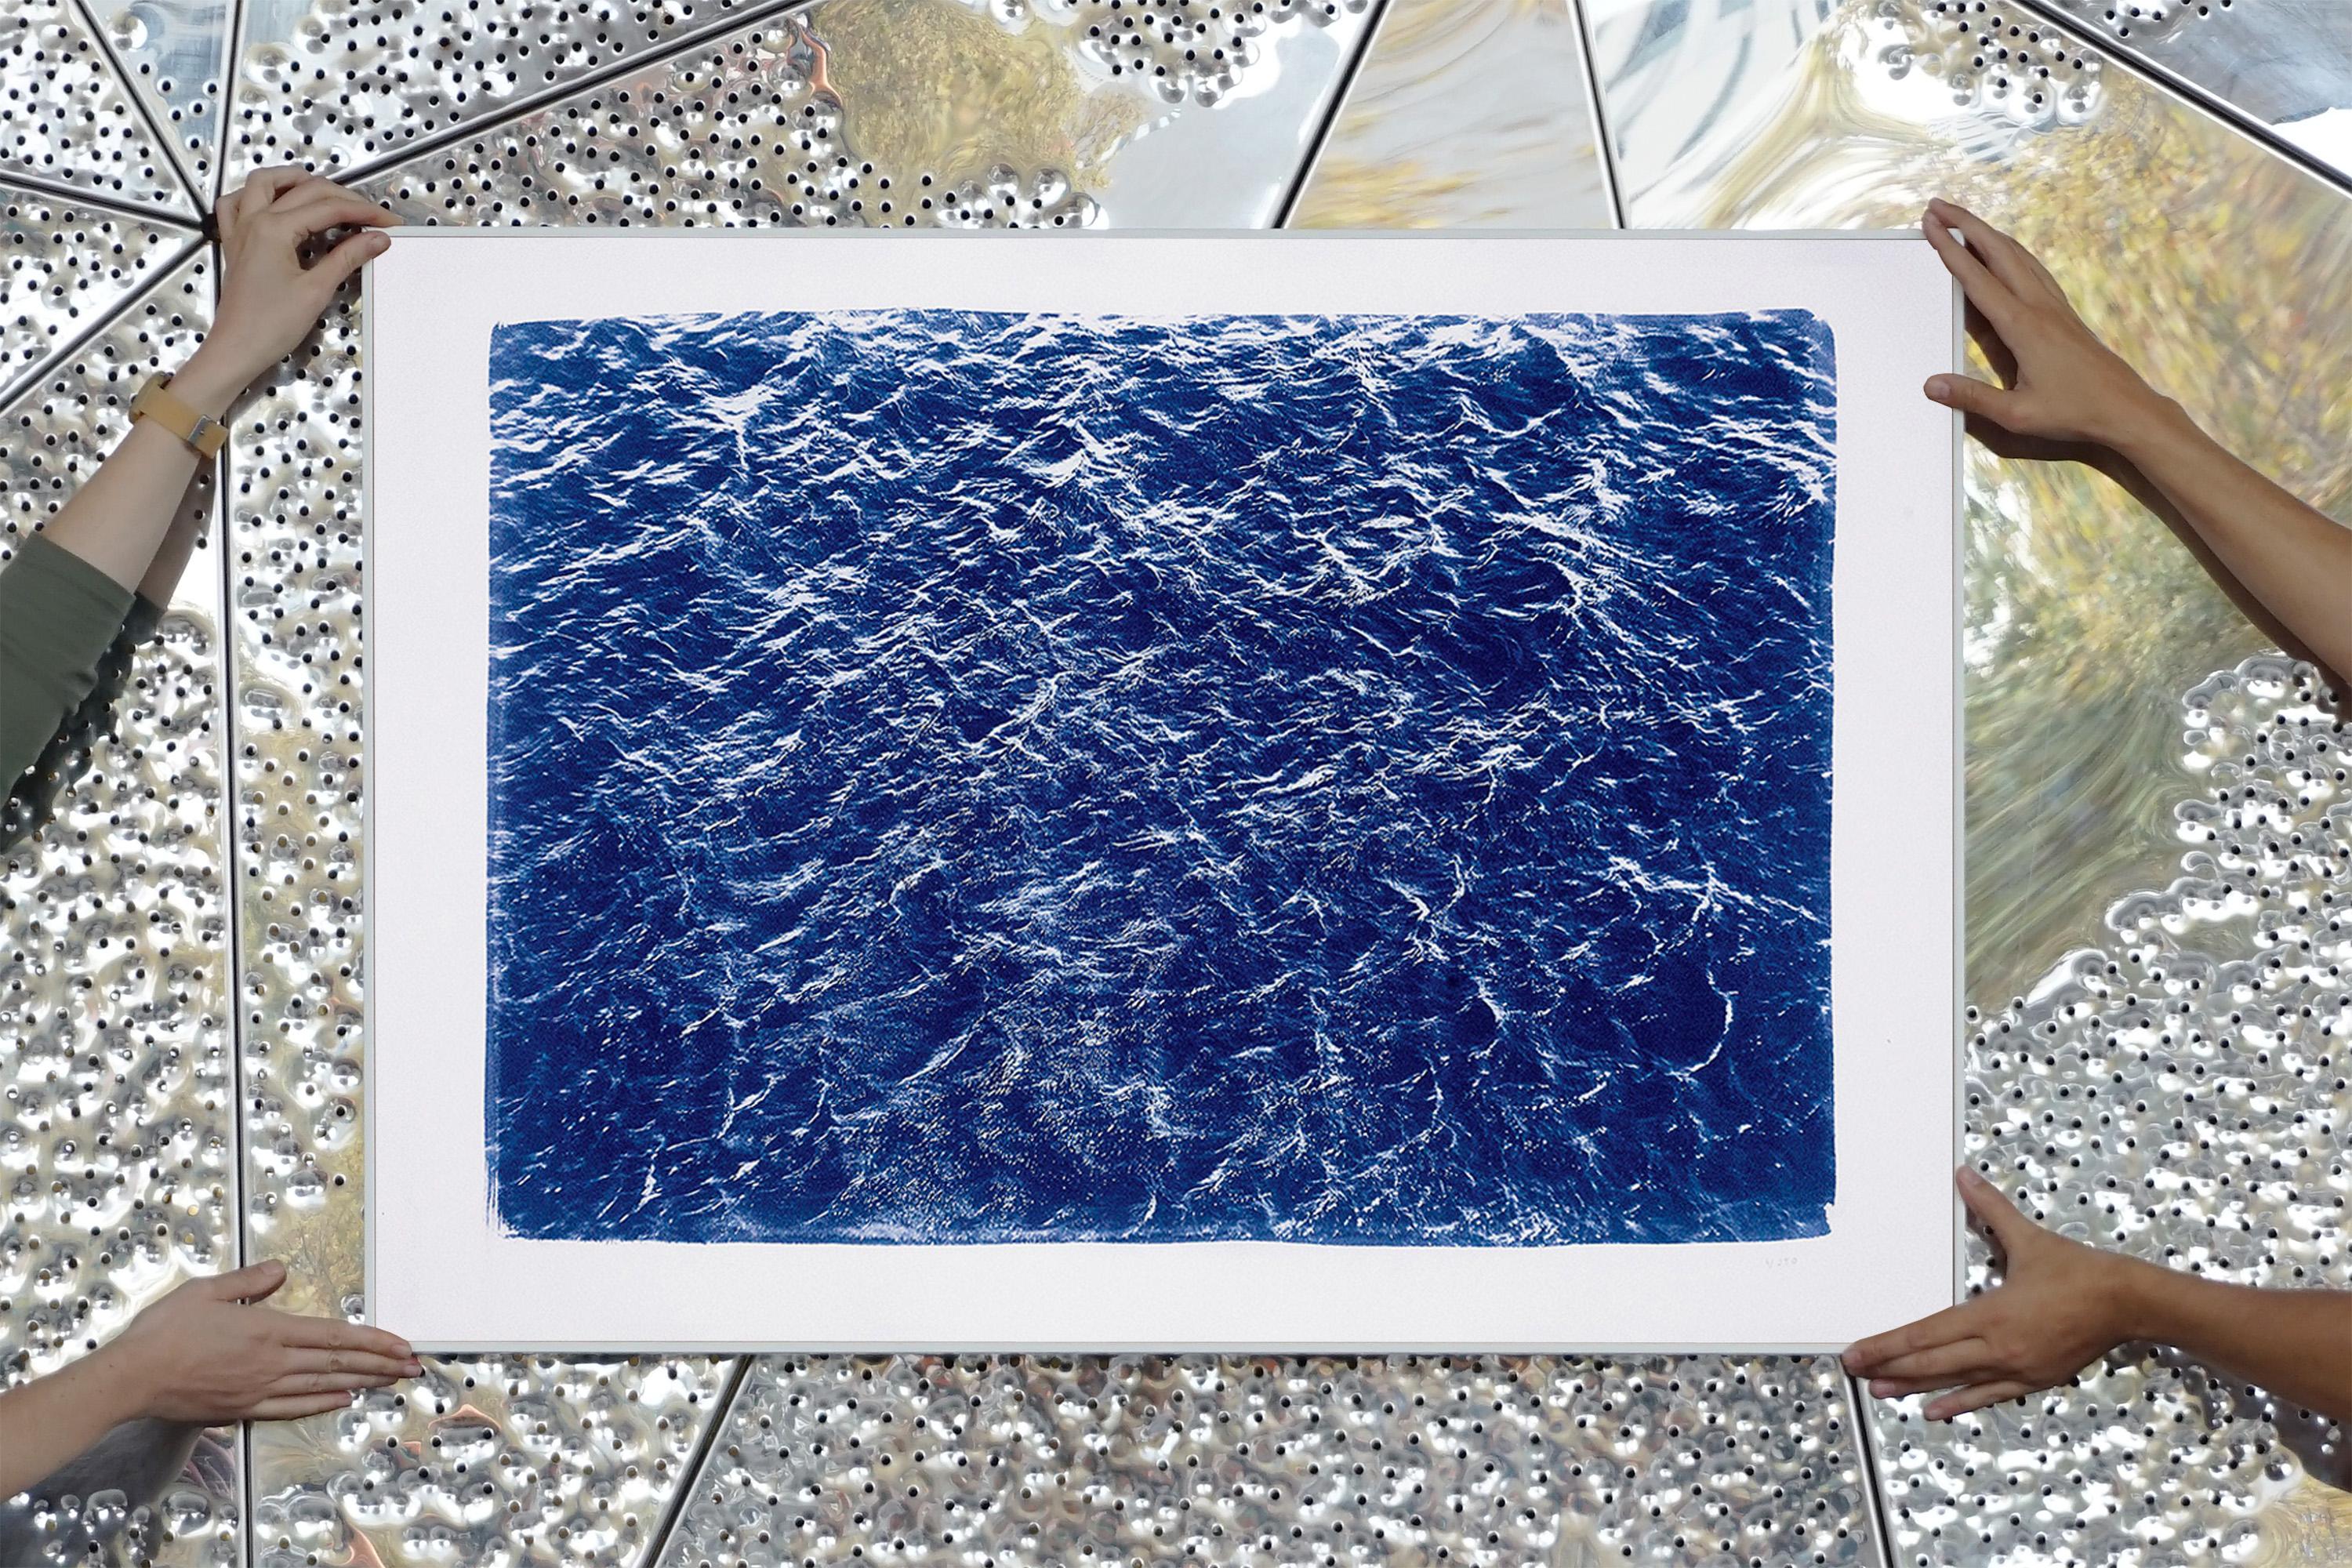 Pacific Ocean Currents, Handmade Cyanotype Seascape in Blue, Waves Landscape  For Sale 1